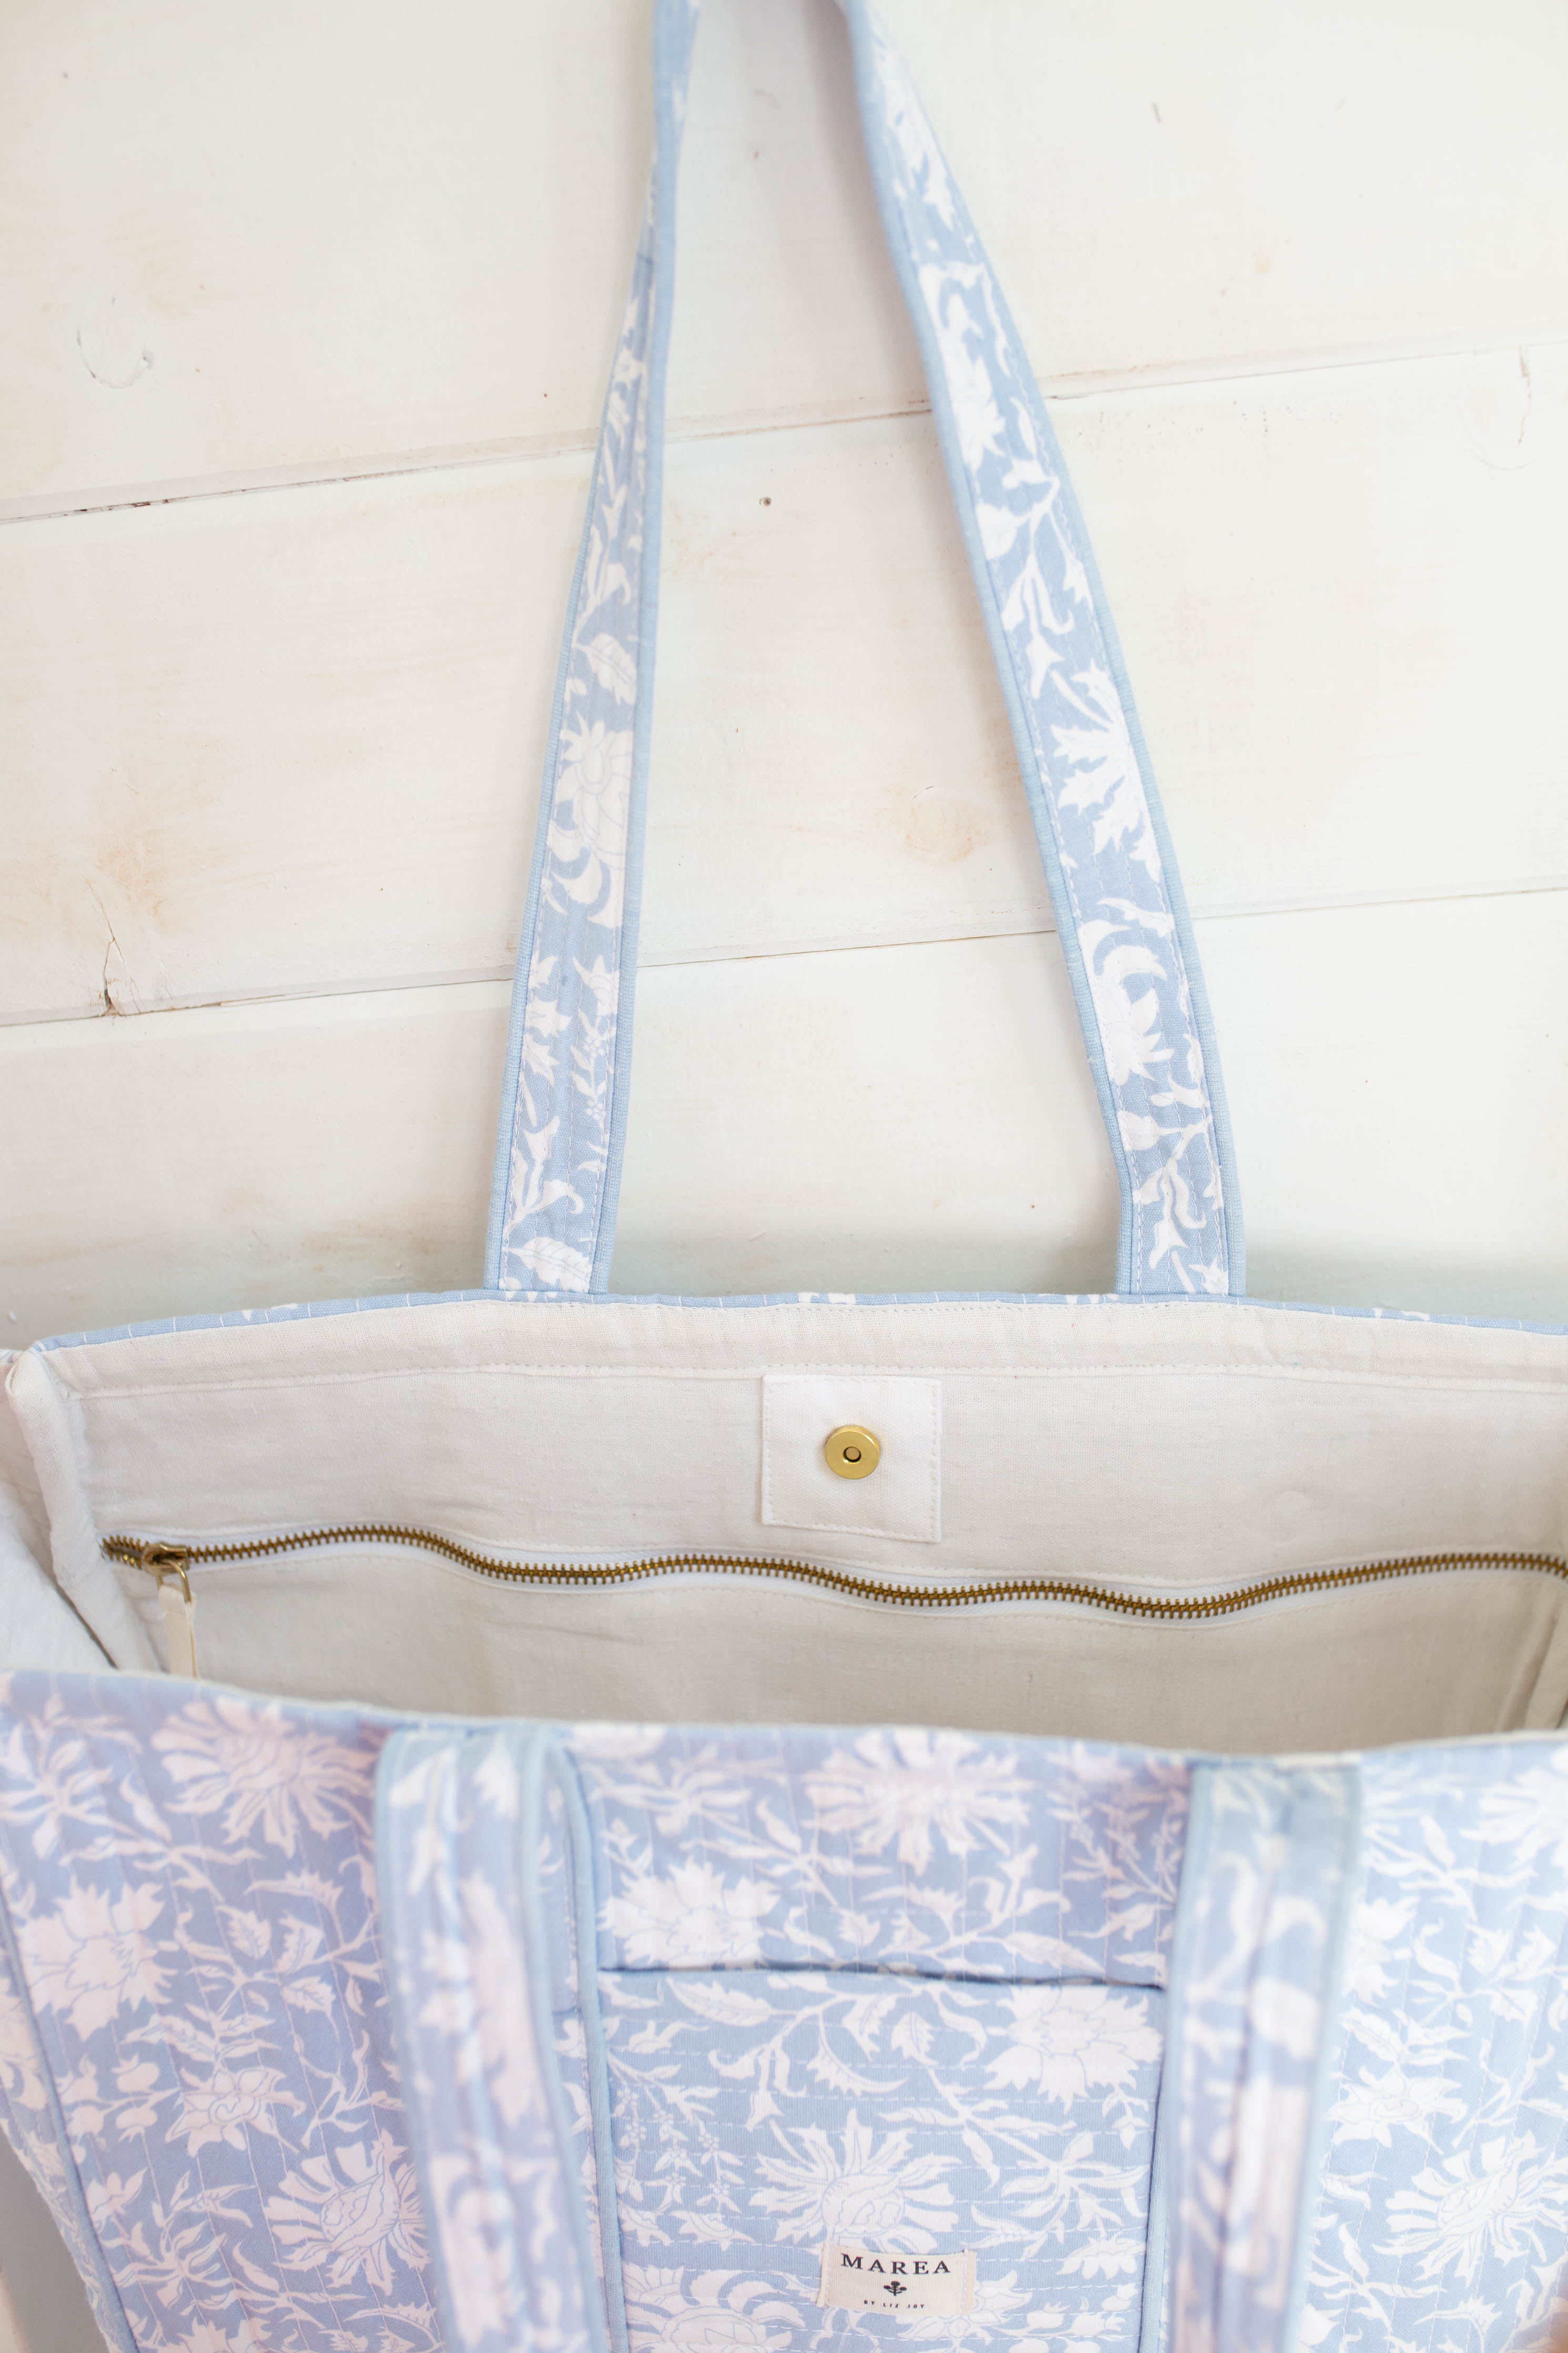 Carry All Tote - Blue White Floral